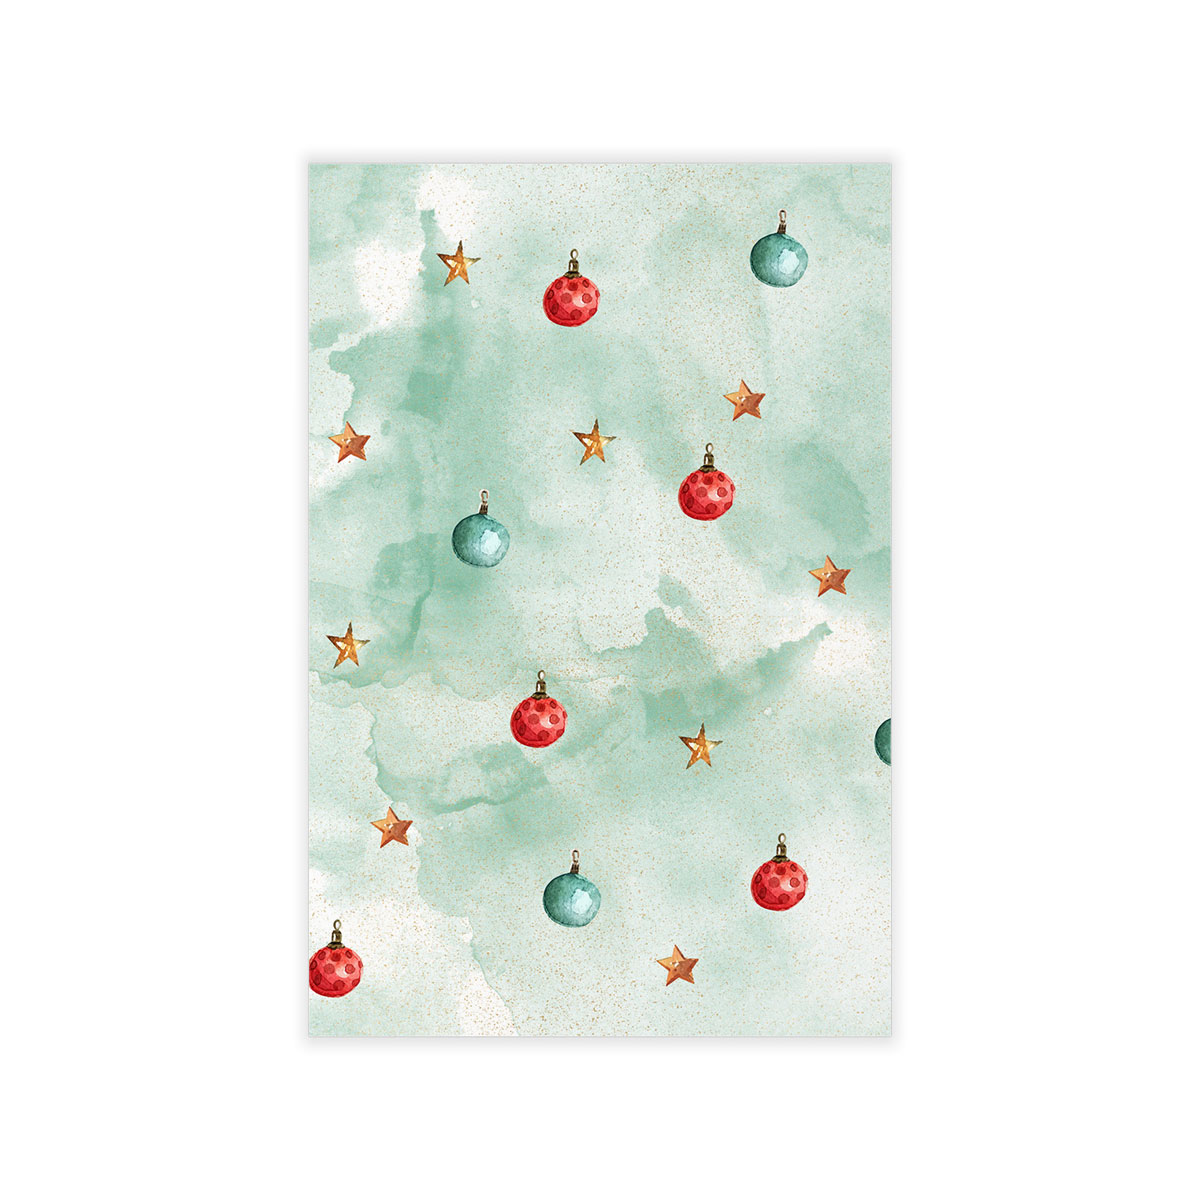 Watercolor Christmas Balls And Stars Pattern Wall Decals